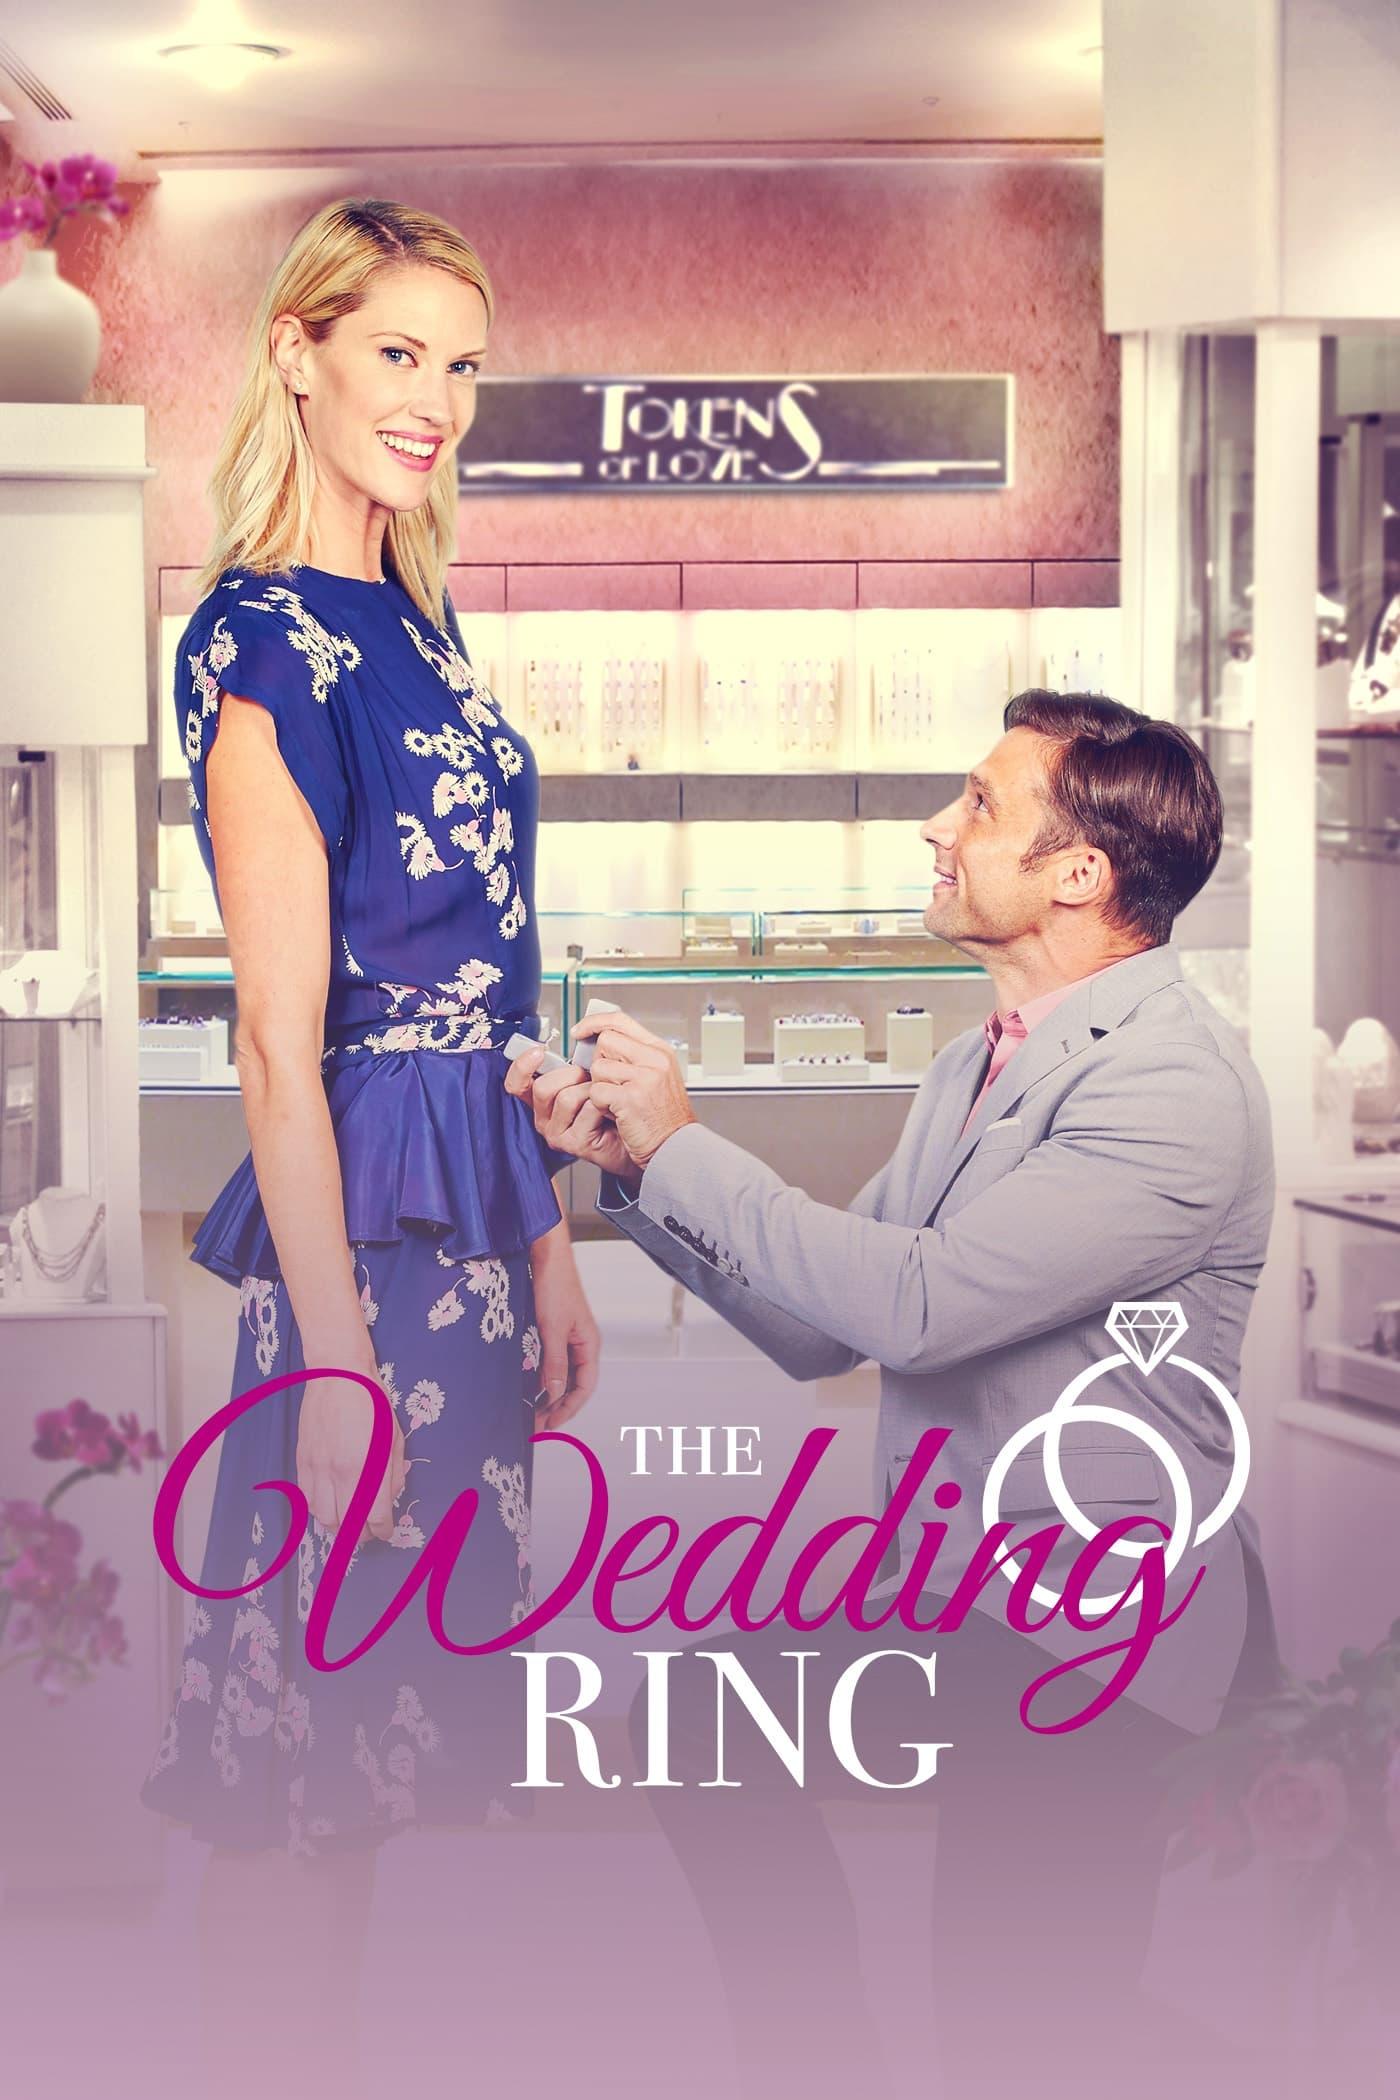 The Wedding Ring poster